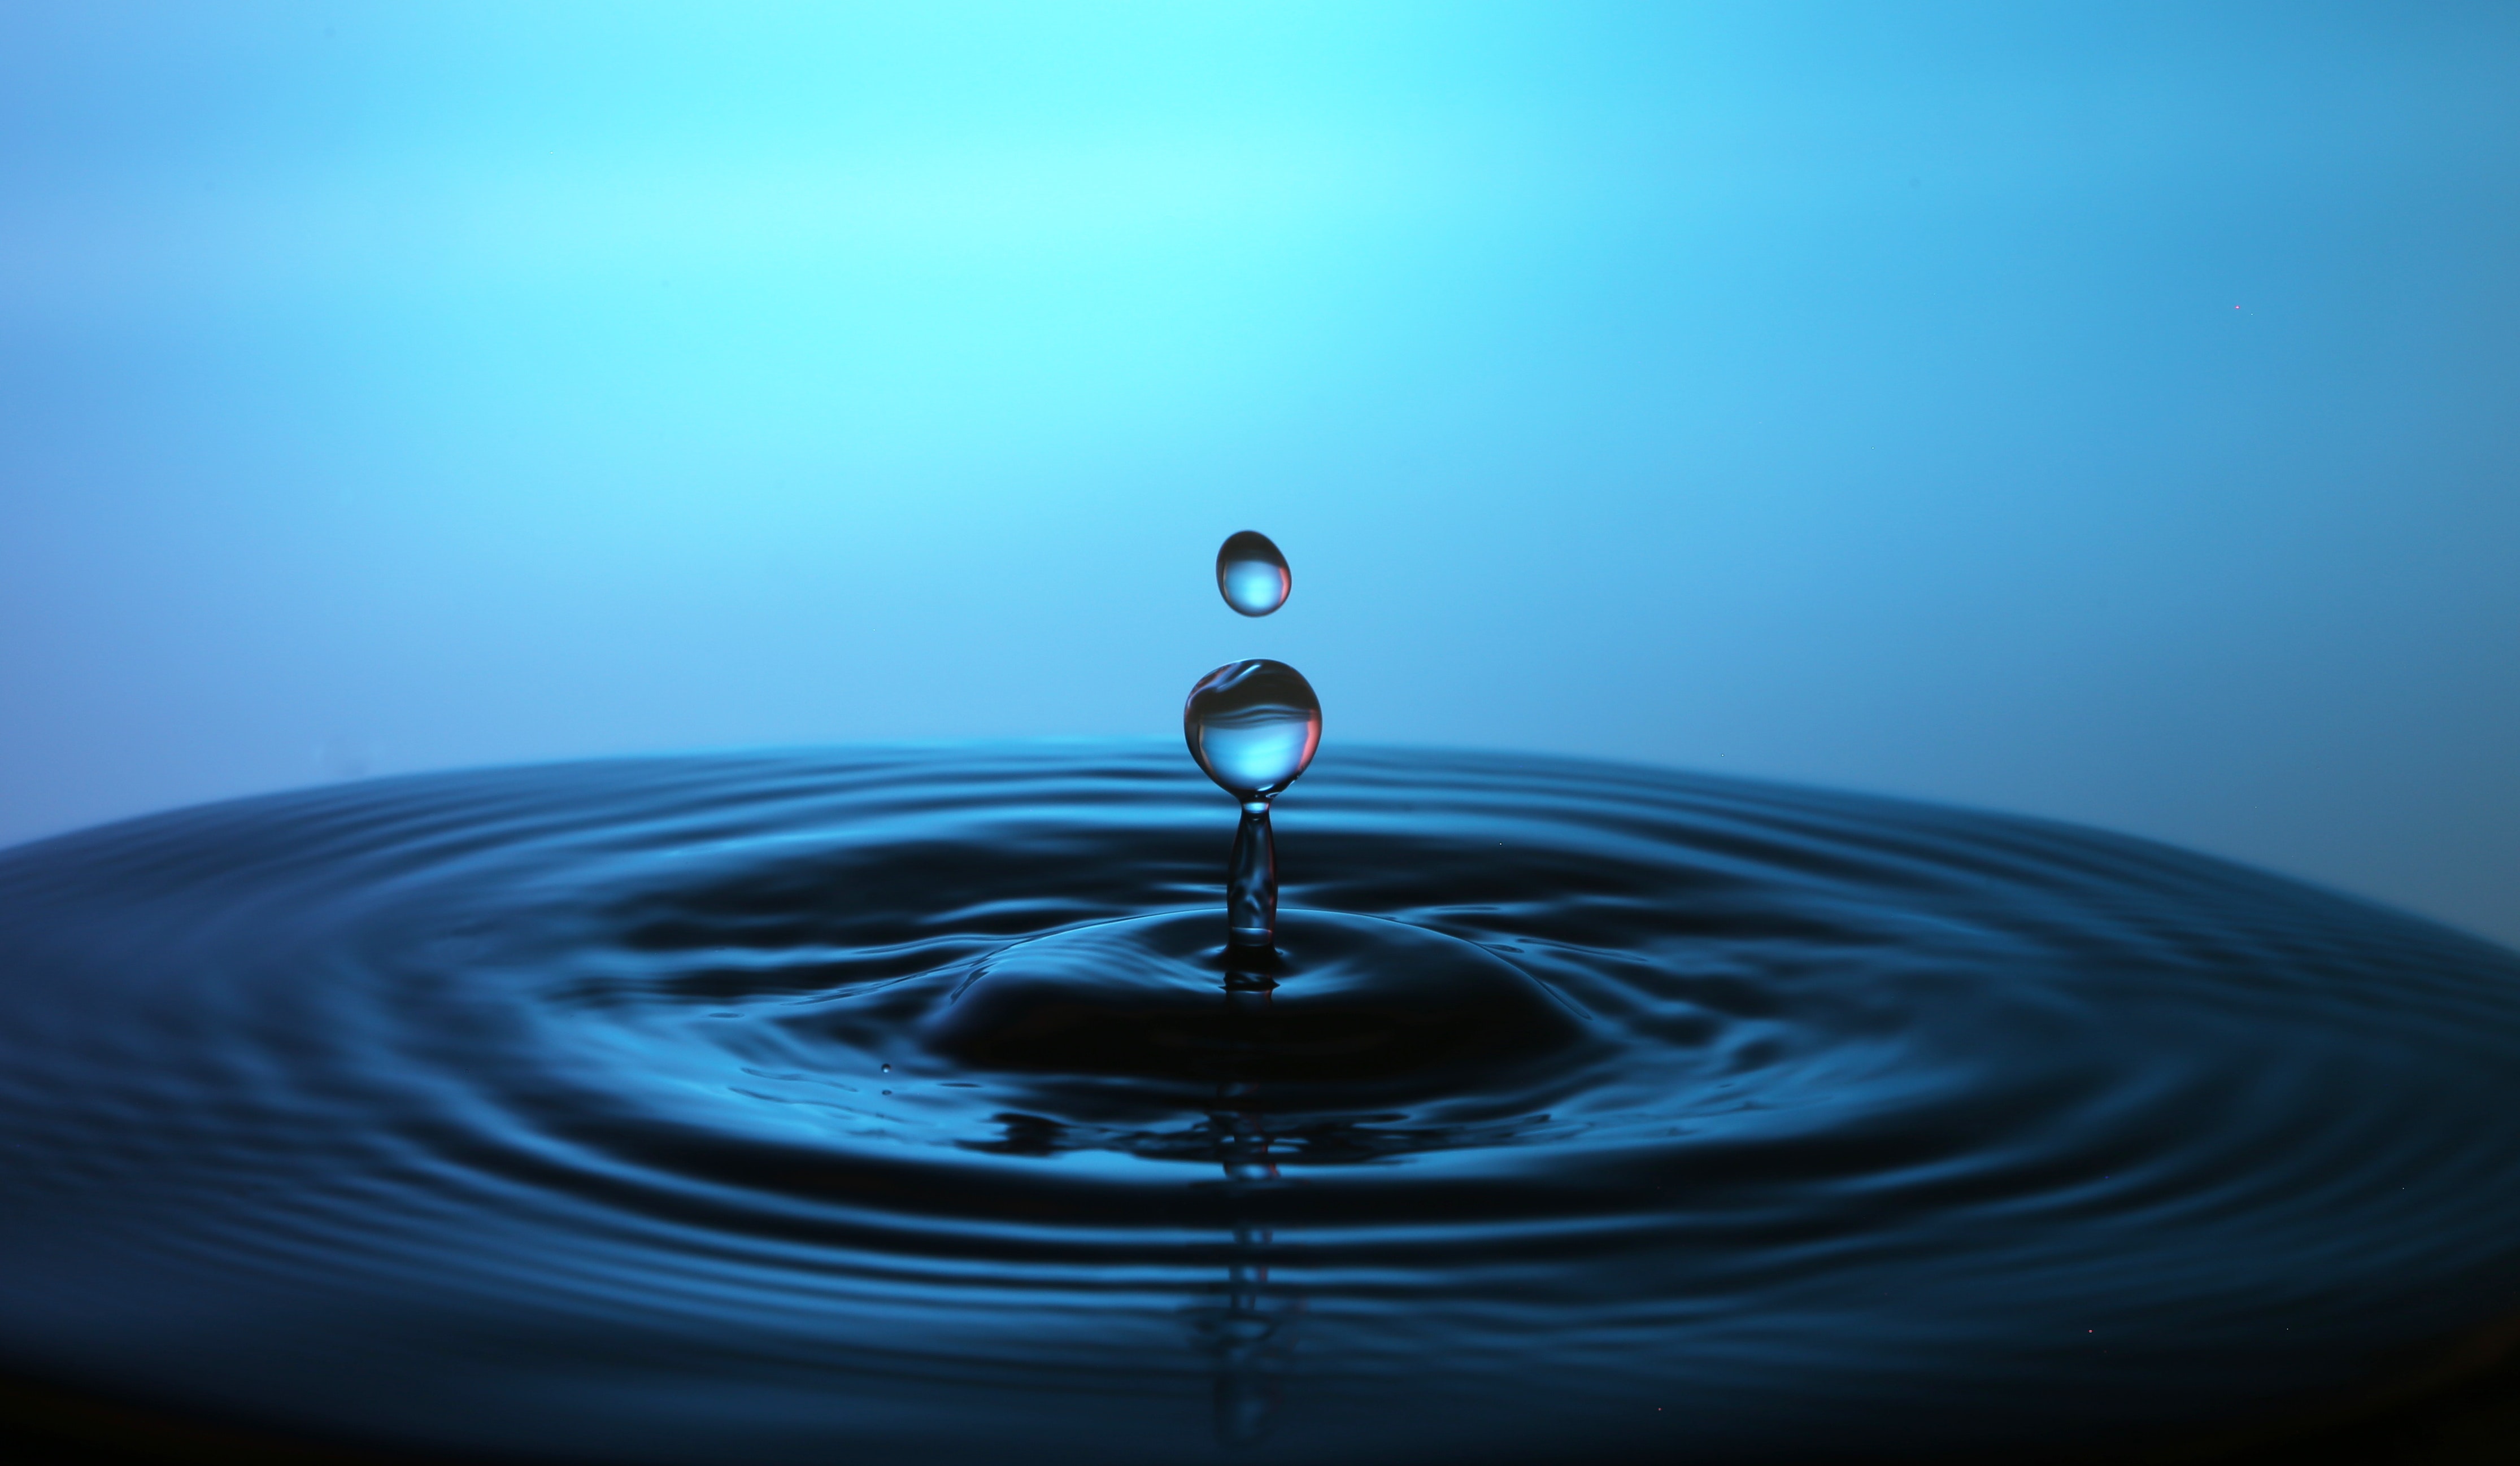 a droplet, the round-about inspiration for Drupal's name